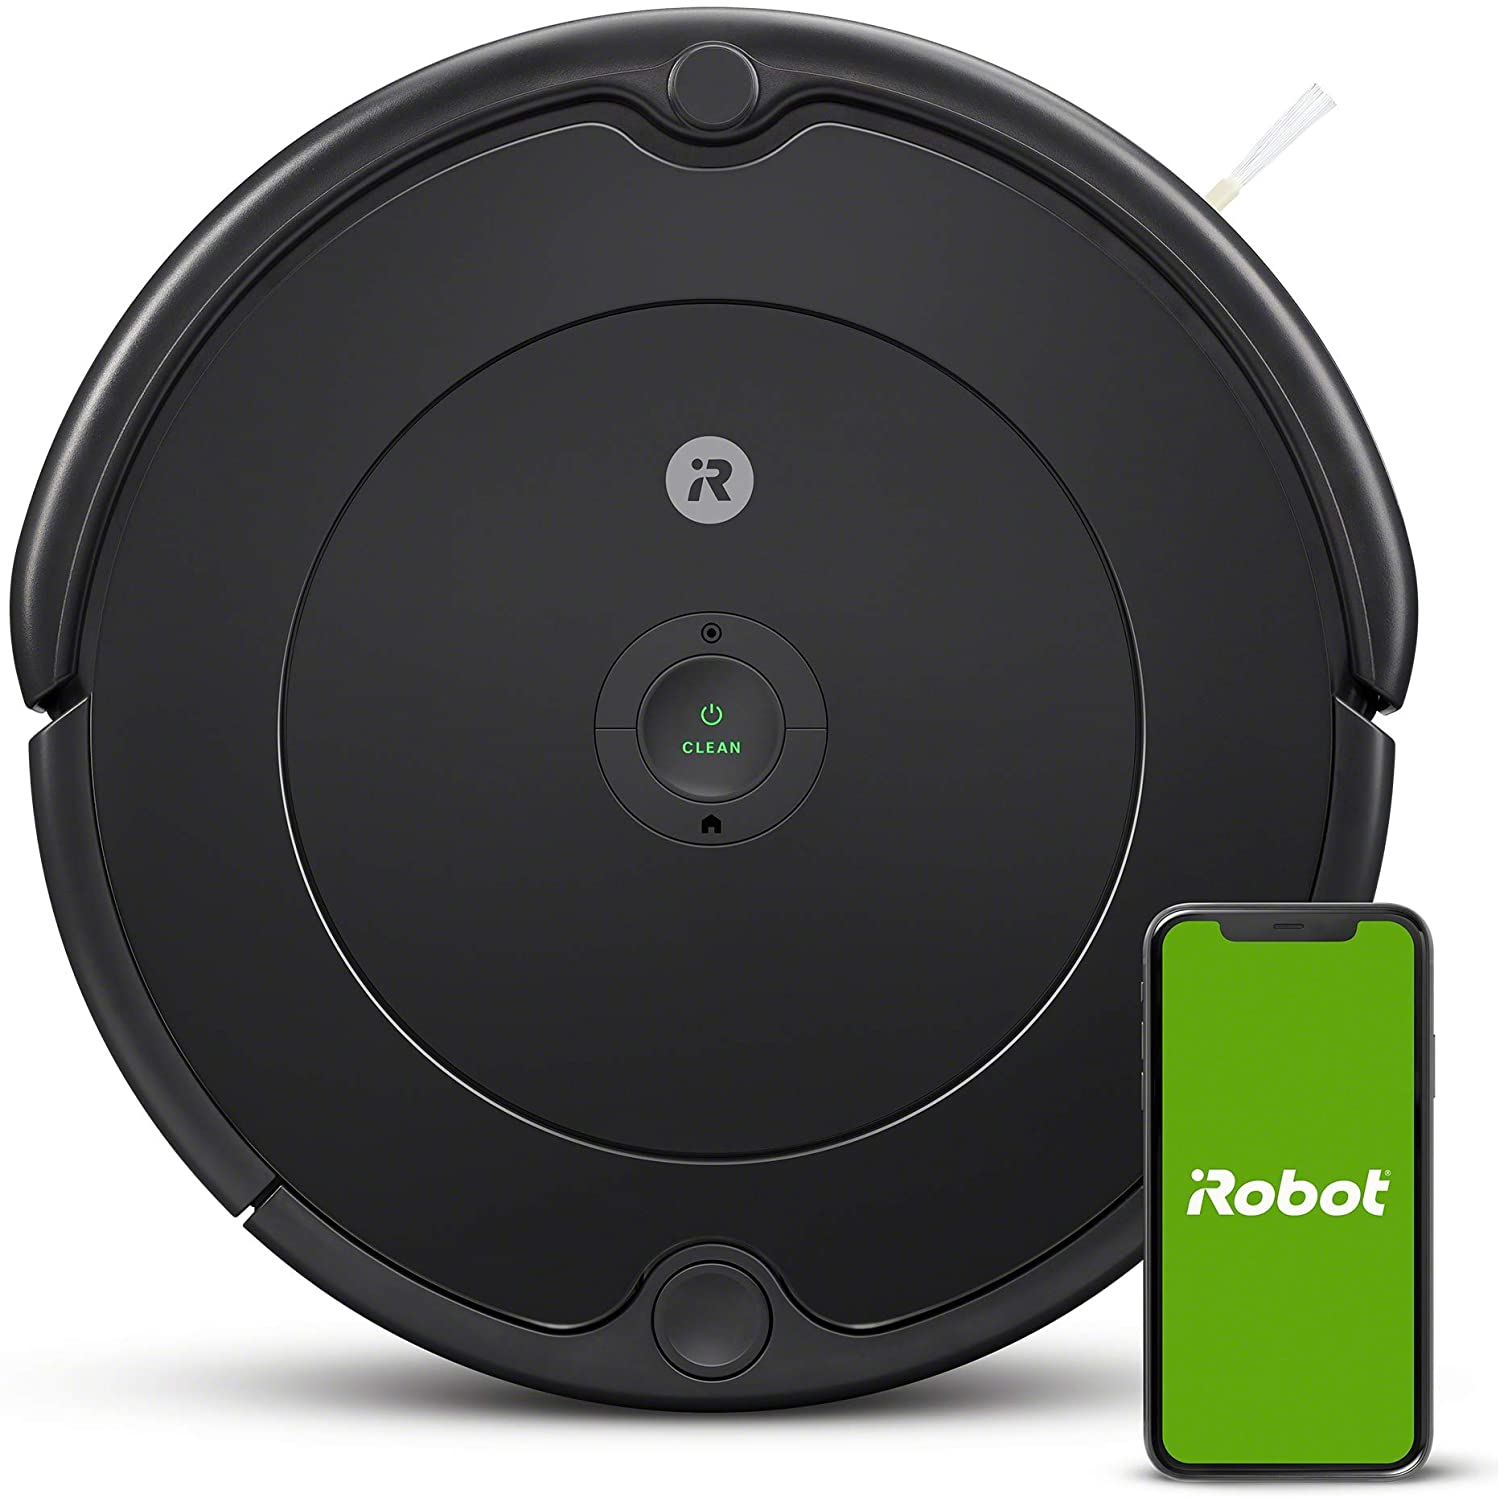 Robot vacuum at a great Black Friday price!